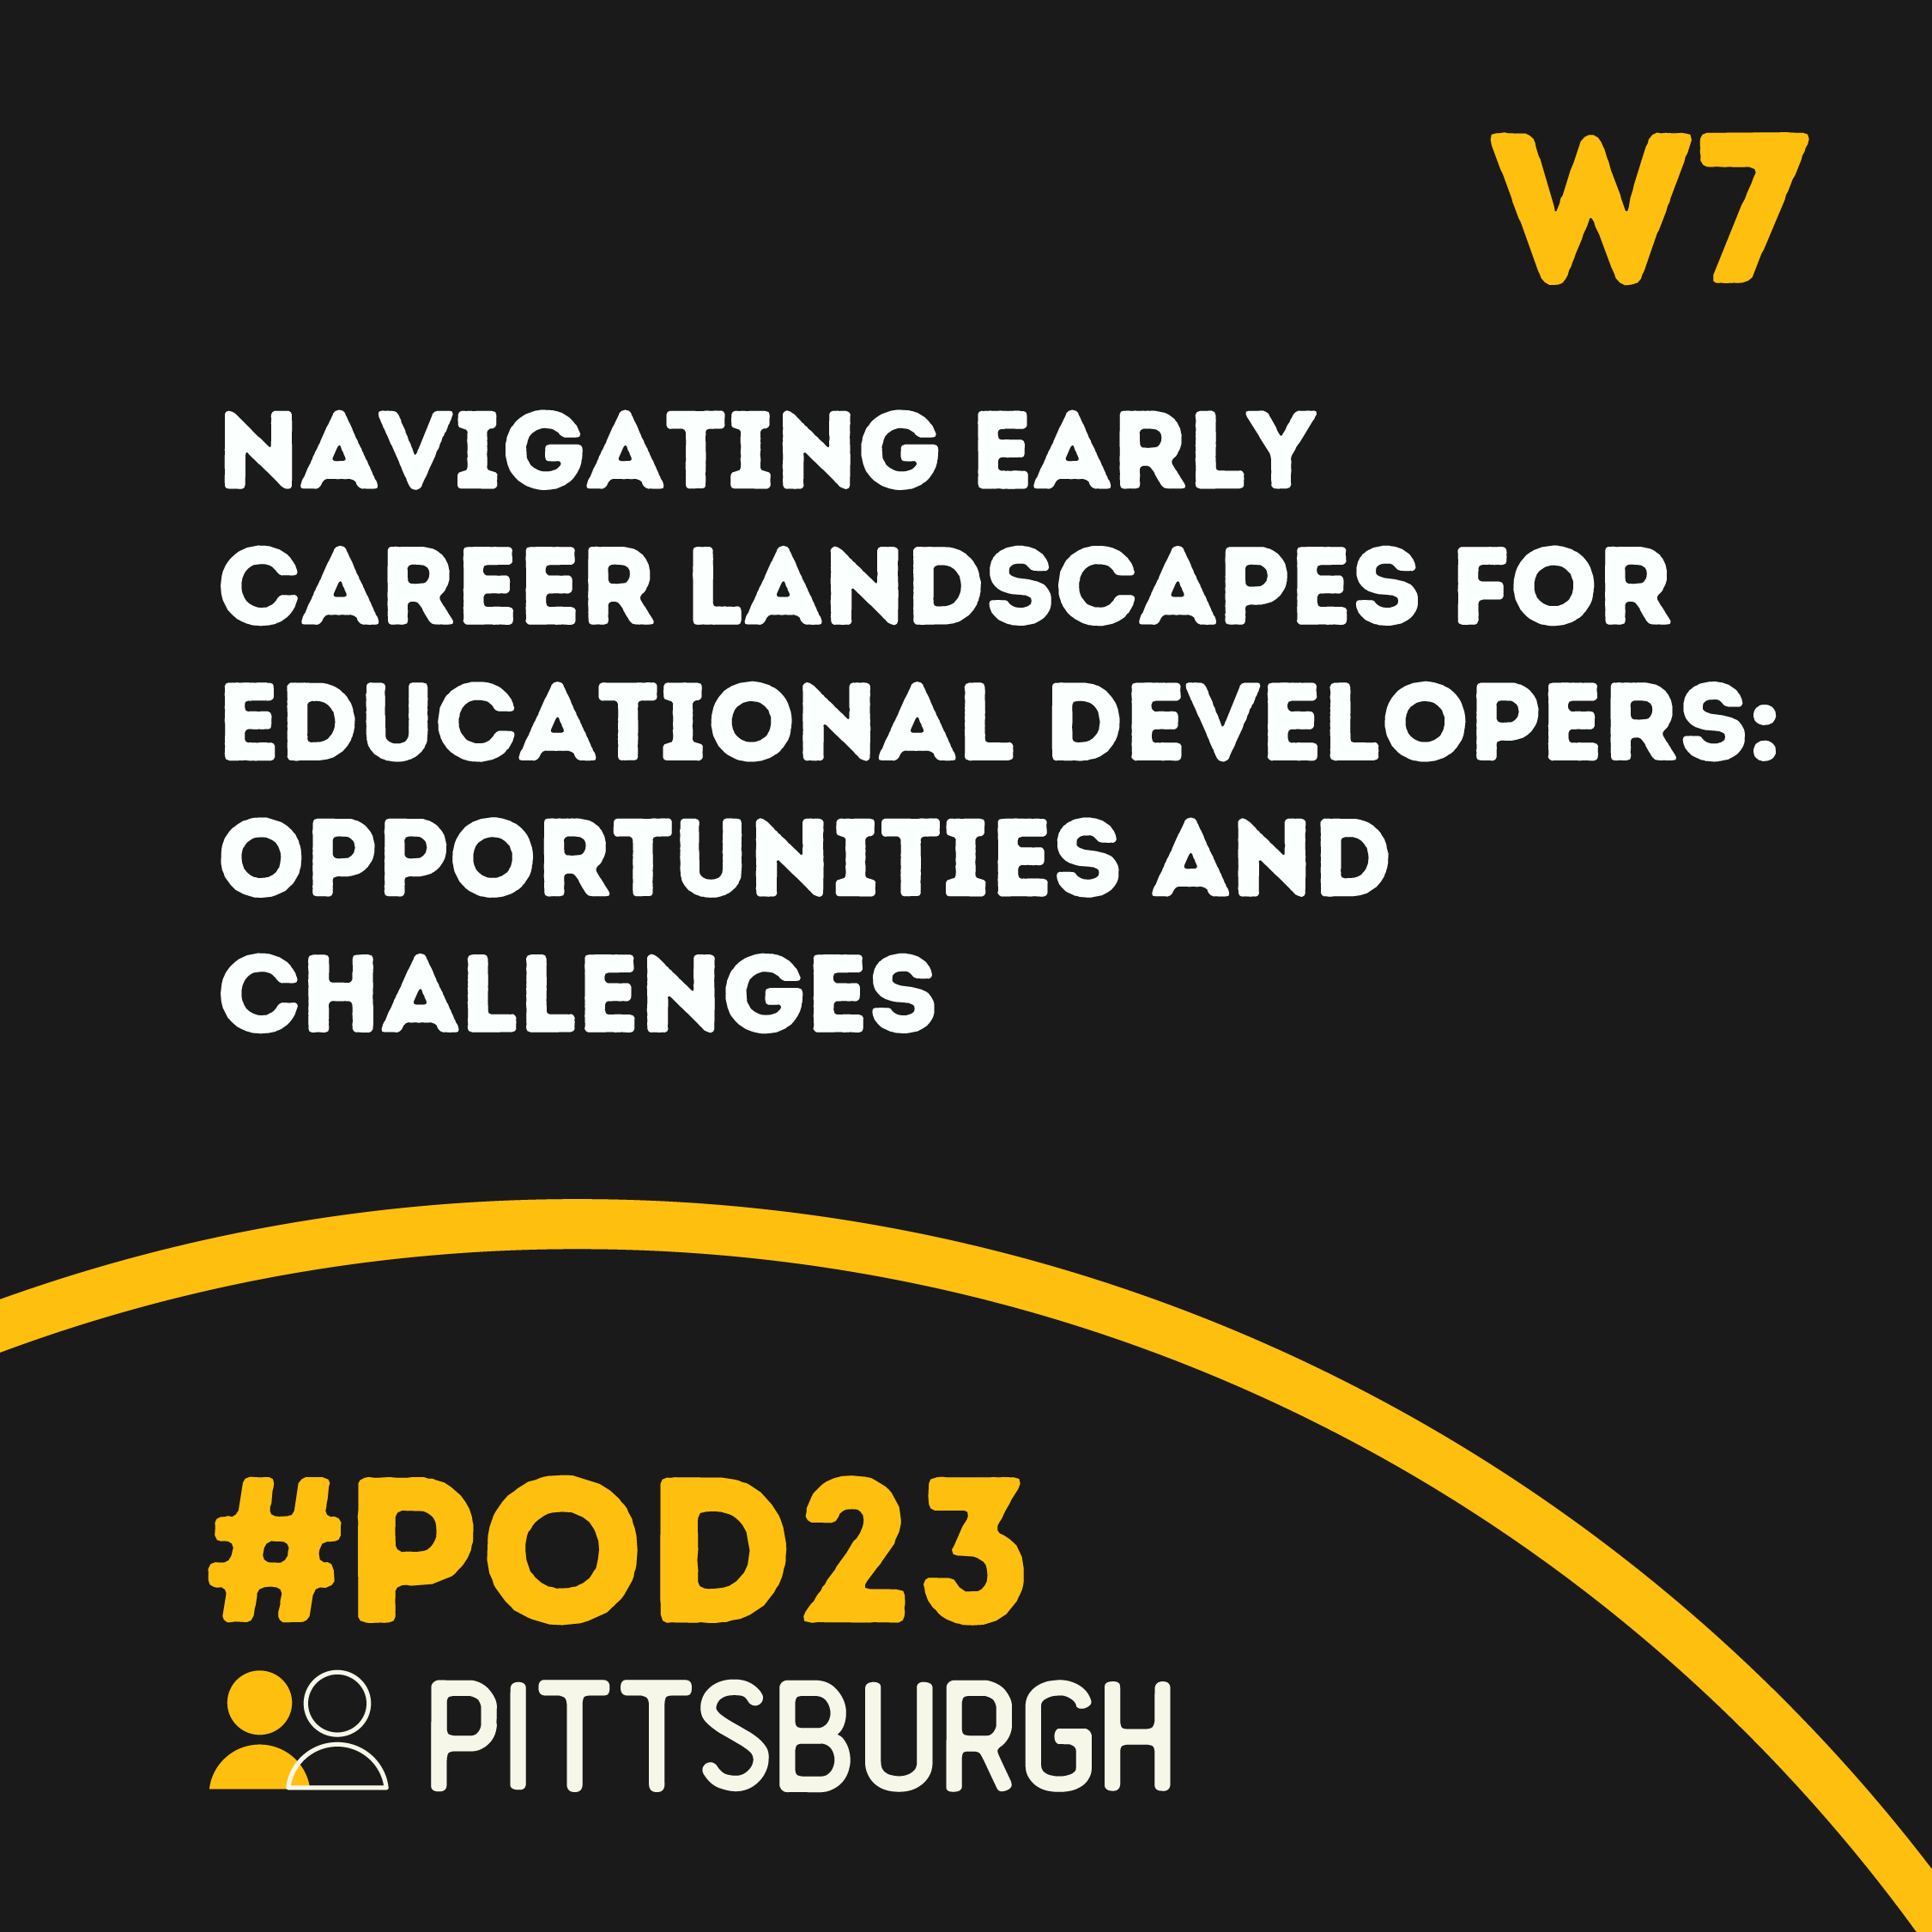 #POD23 W7: Navigating Early Career Landscapes for Educational Developers: Opportunities and Challenges